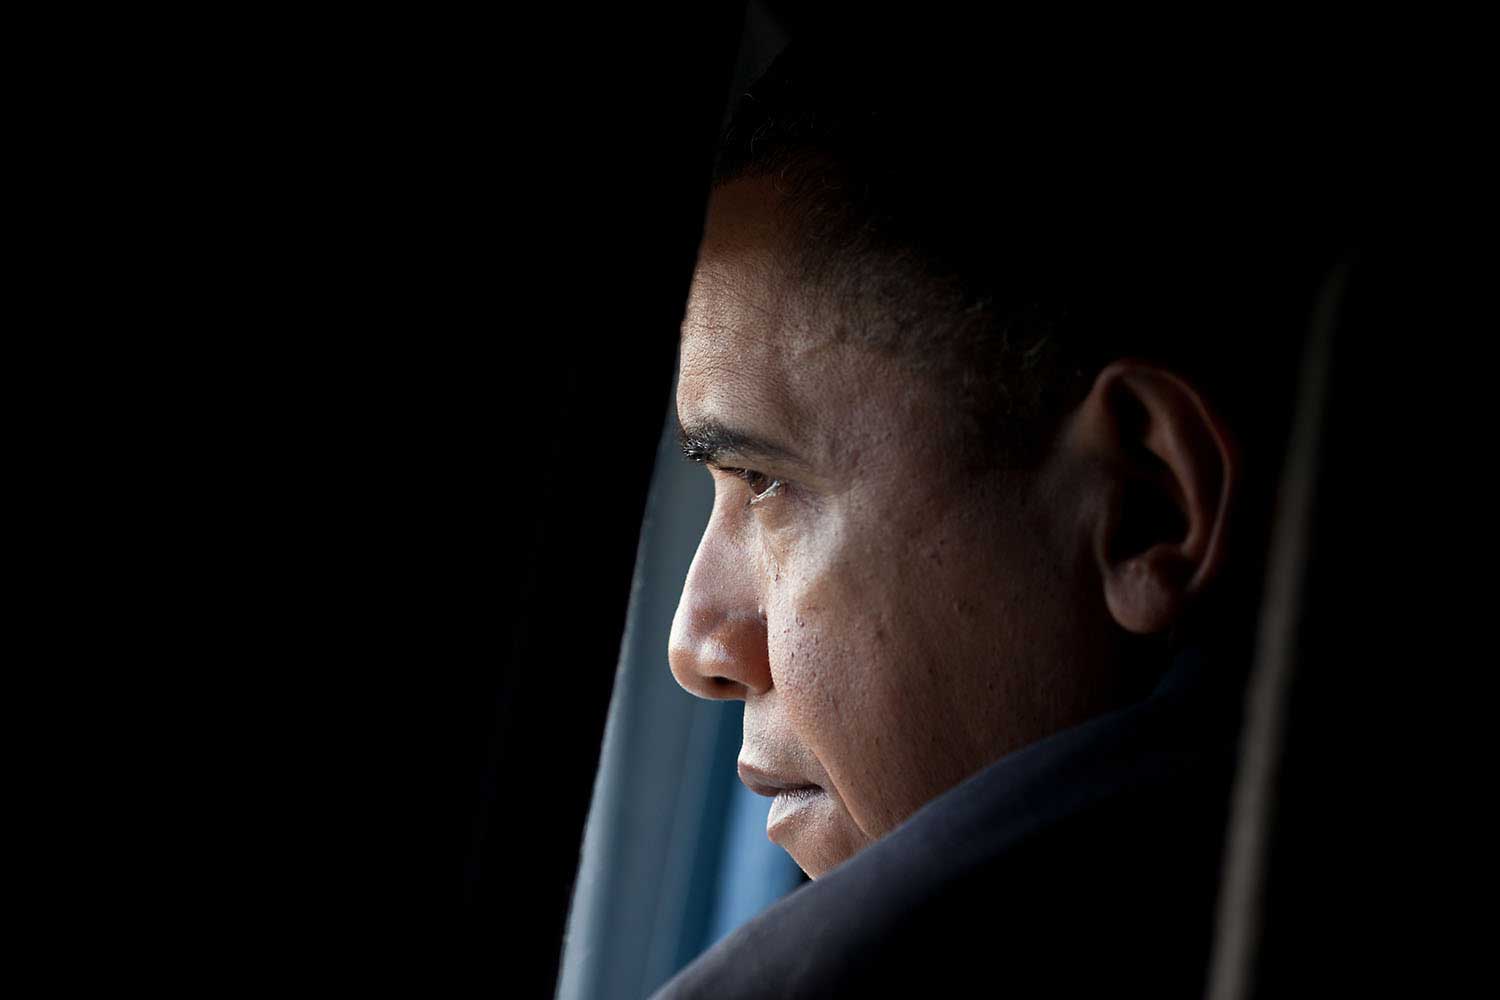 President Obama looks out the window aboard the Marine One helicopter before speaking at Hampton University commencement in Armstrong Stadium, Hampton, Va. May 9, 2010.